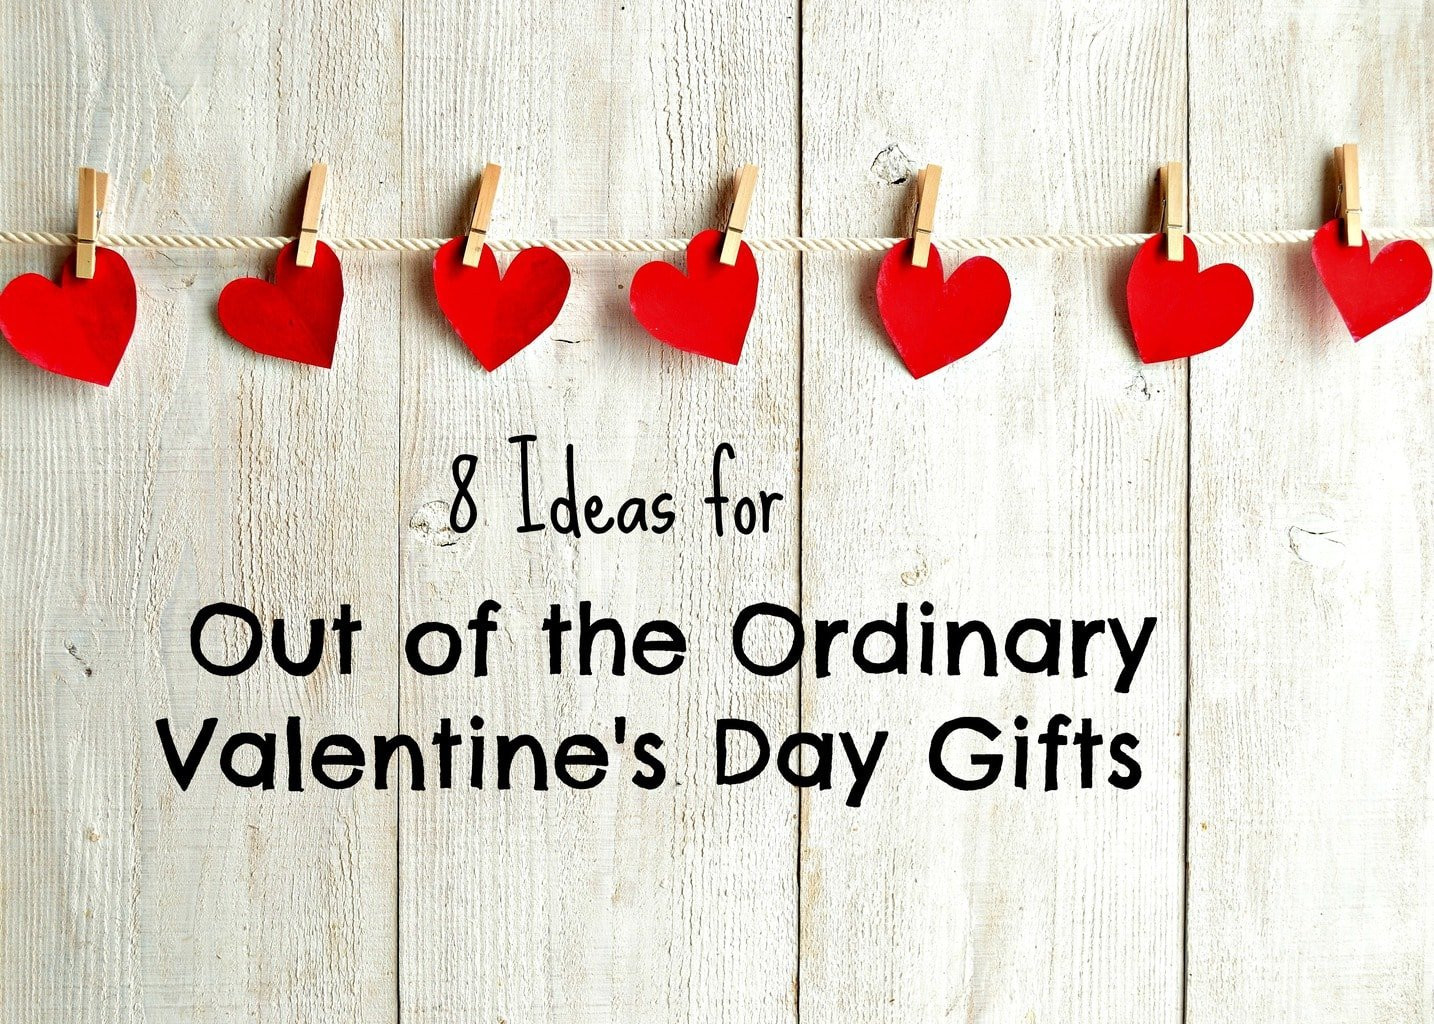 Cheap Valentines Day Ideas
 Inexpensive Date Night Ideas for Valentine s Day